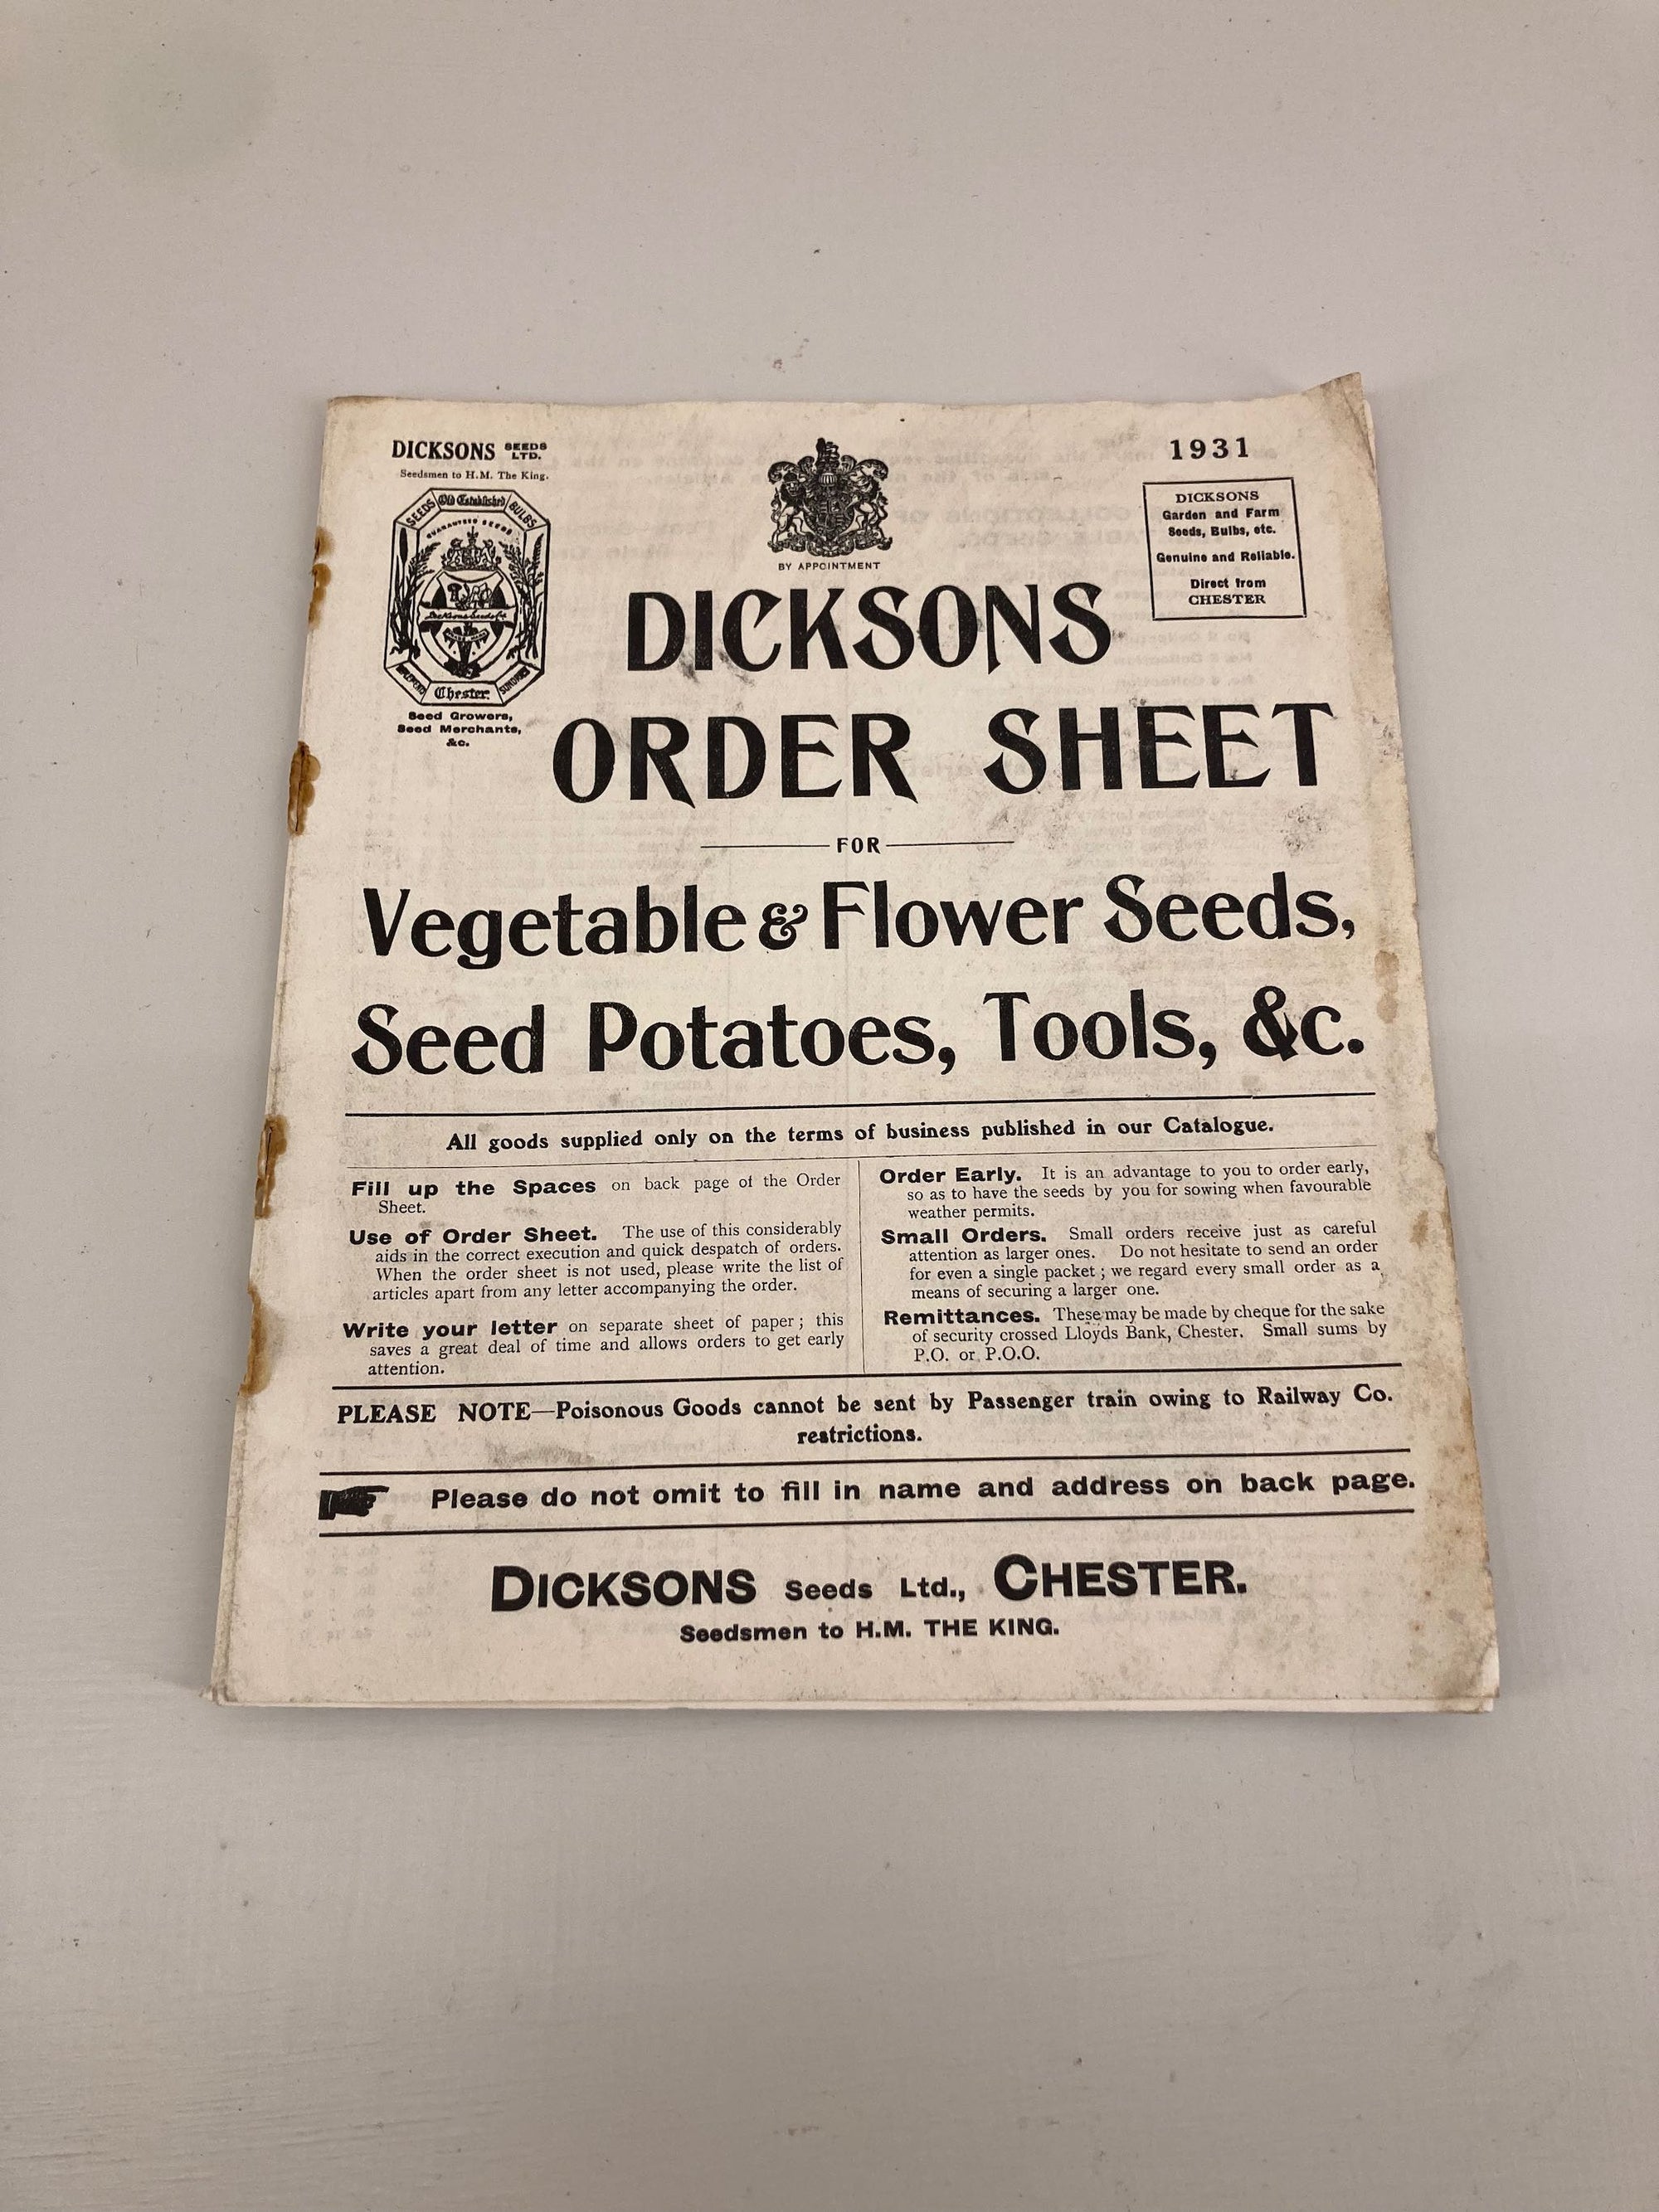 Dicksons Seed Catalogue, 1931